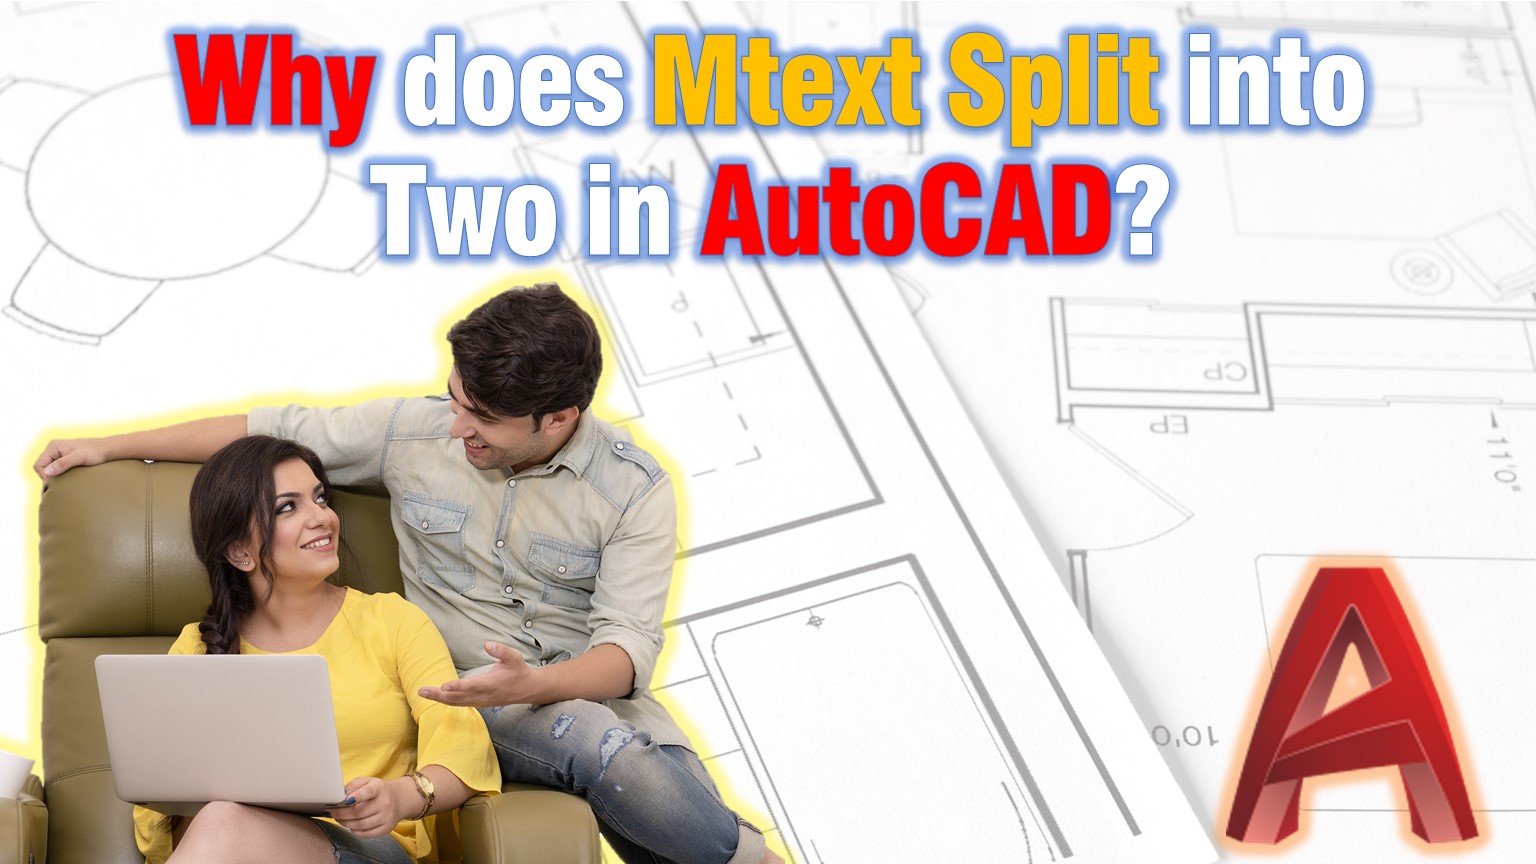 Why does Mtext split into two in AutoCAD